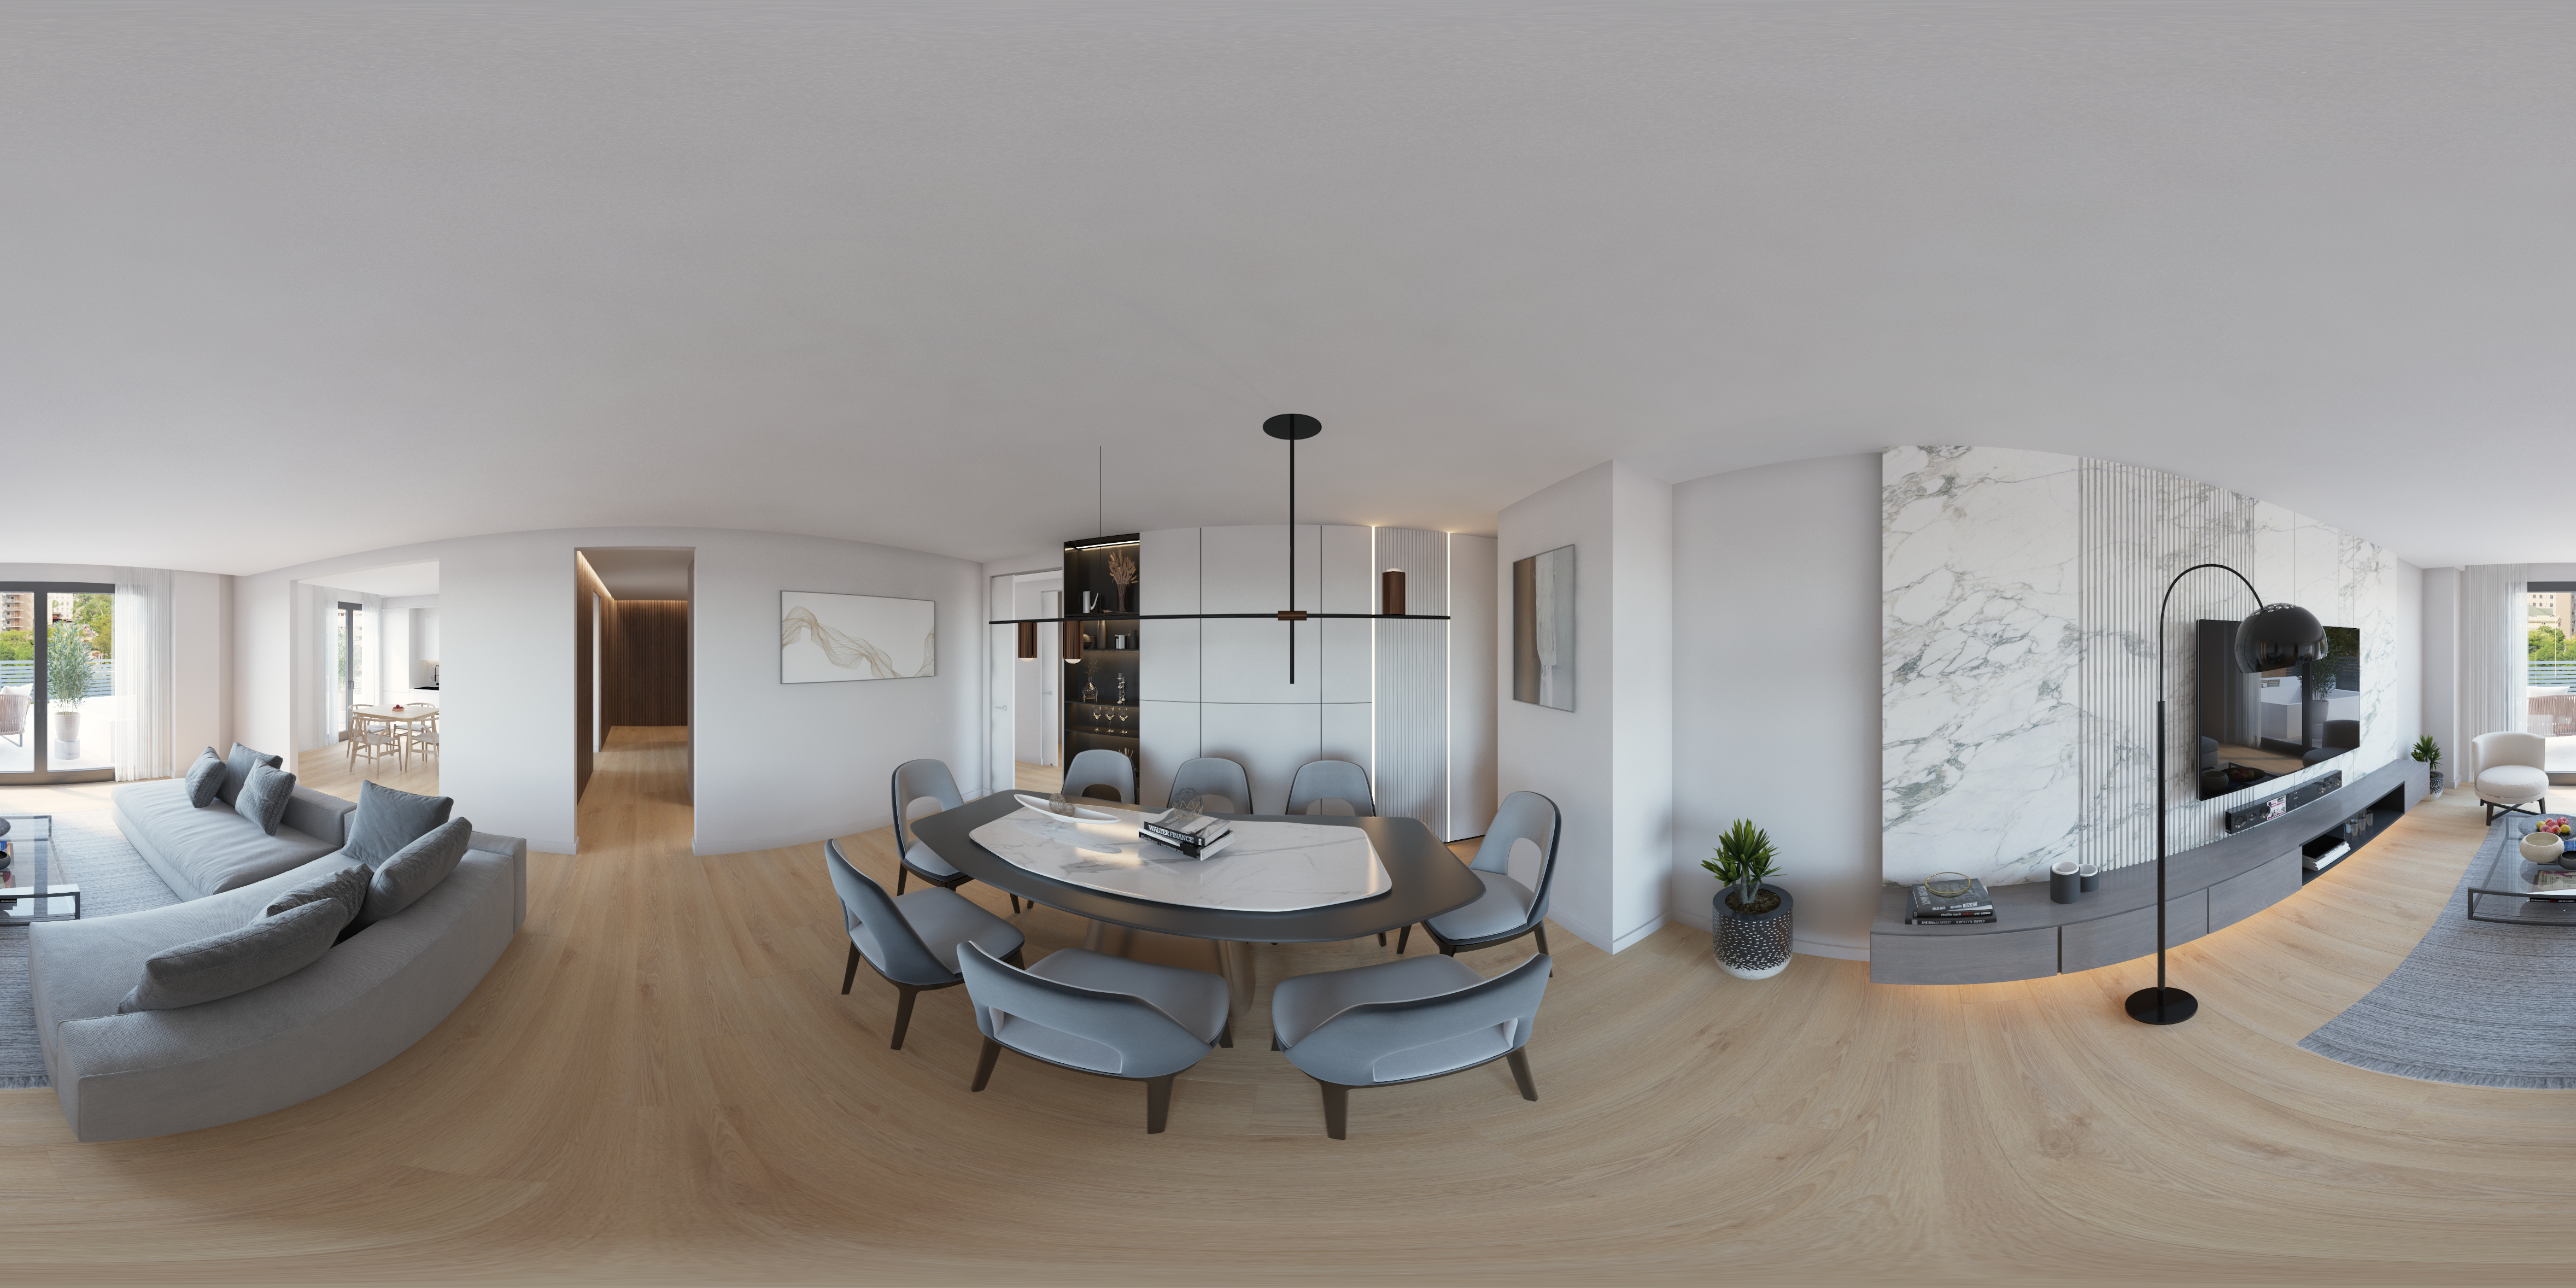 Incredibly fast delivery of 360 rendering for virtual reality experience of luxury home in italy with marble walls, design pendant lights, oak floors, and dark wood media set